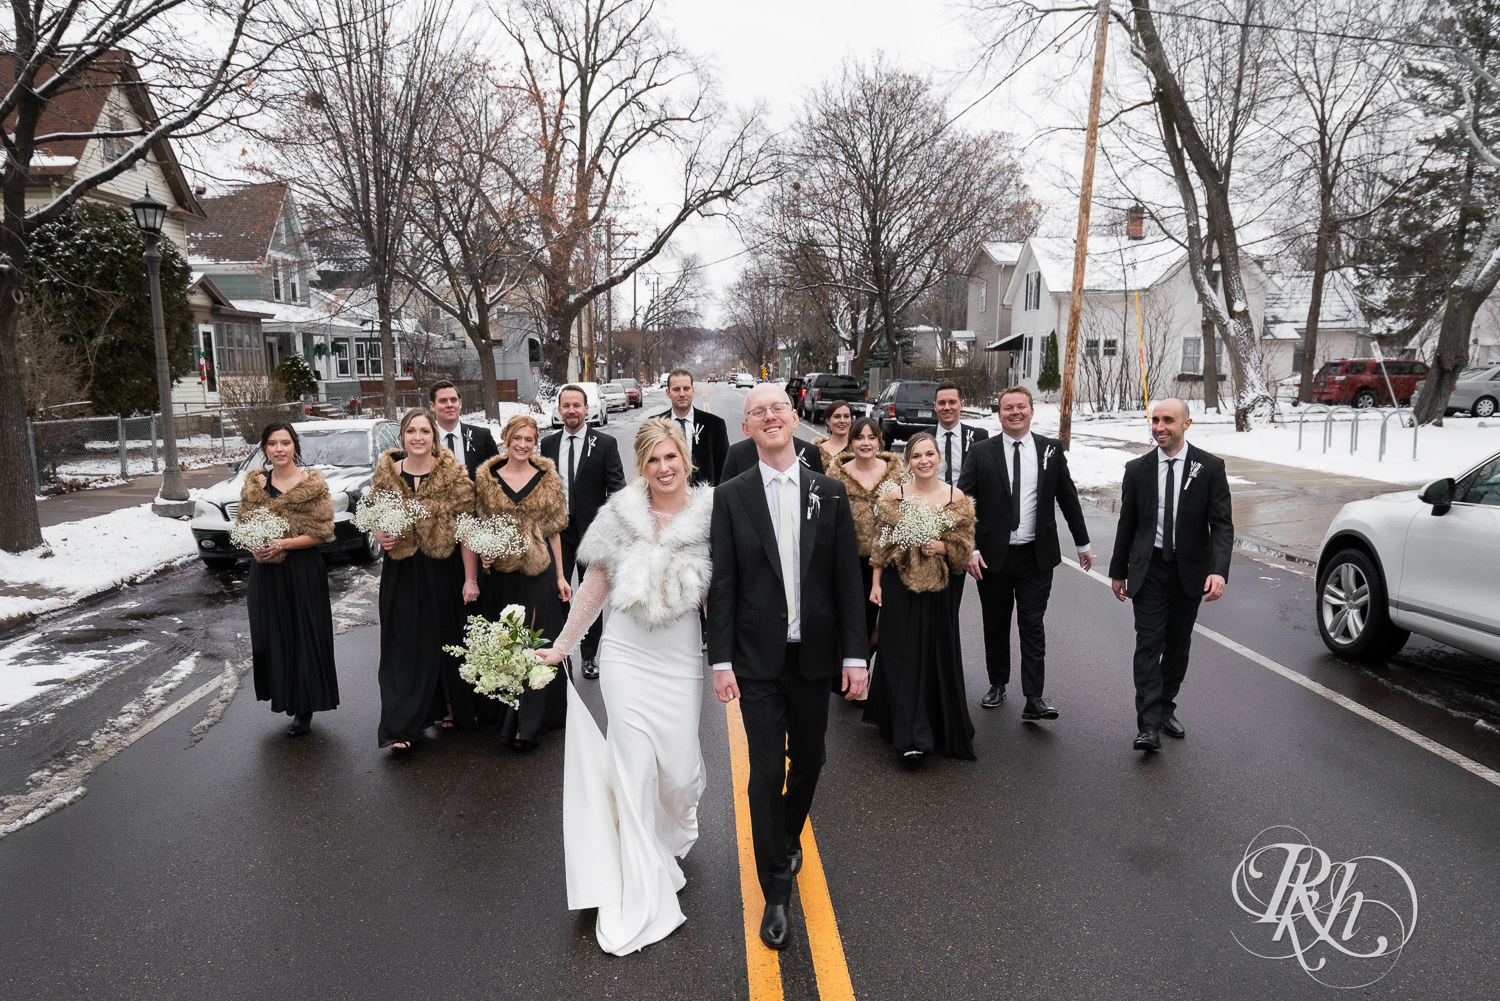 Wedding party smiles with bride and groom in the street in Saint Paul, Minnesota on winter wedding day.